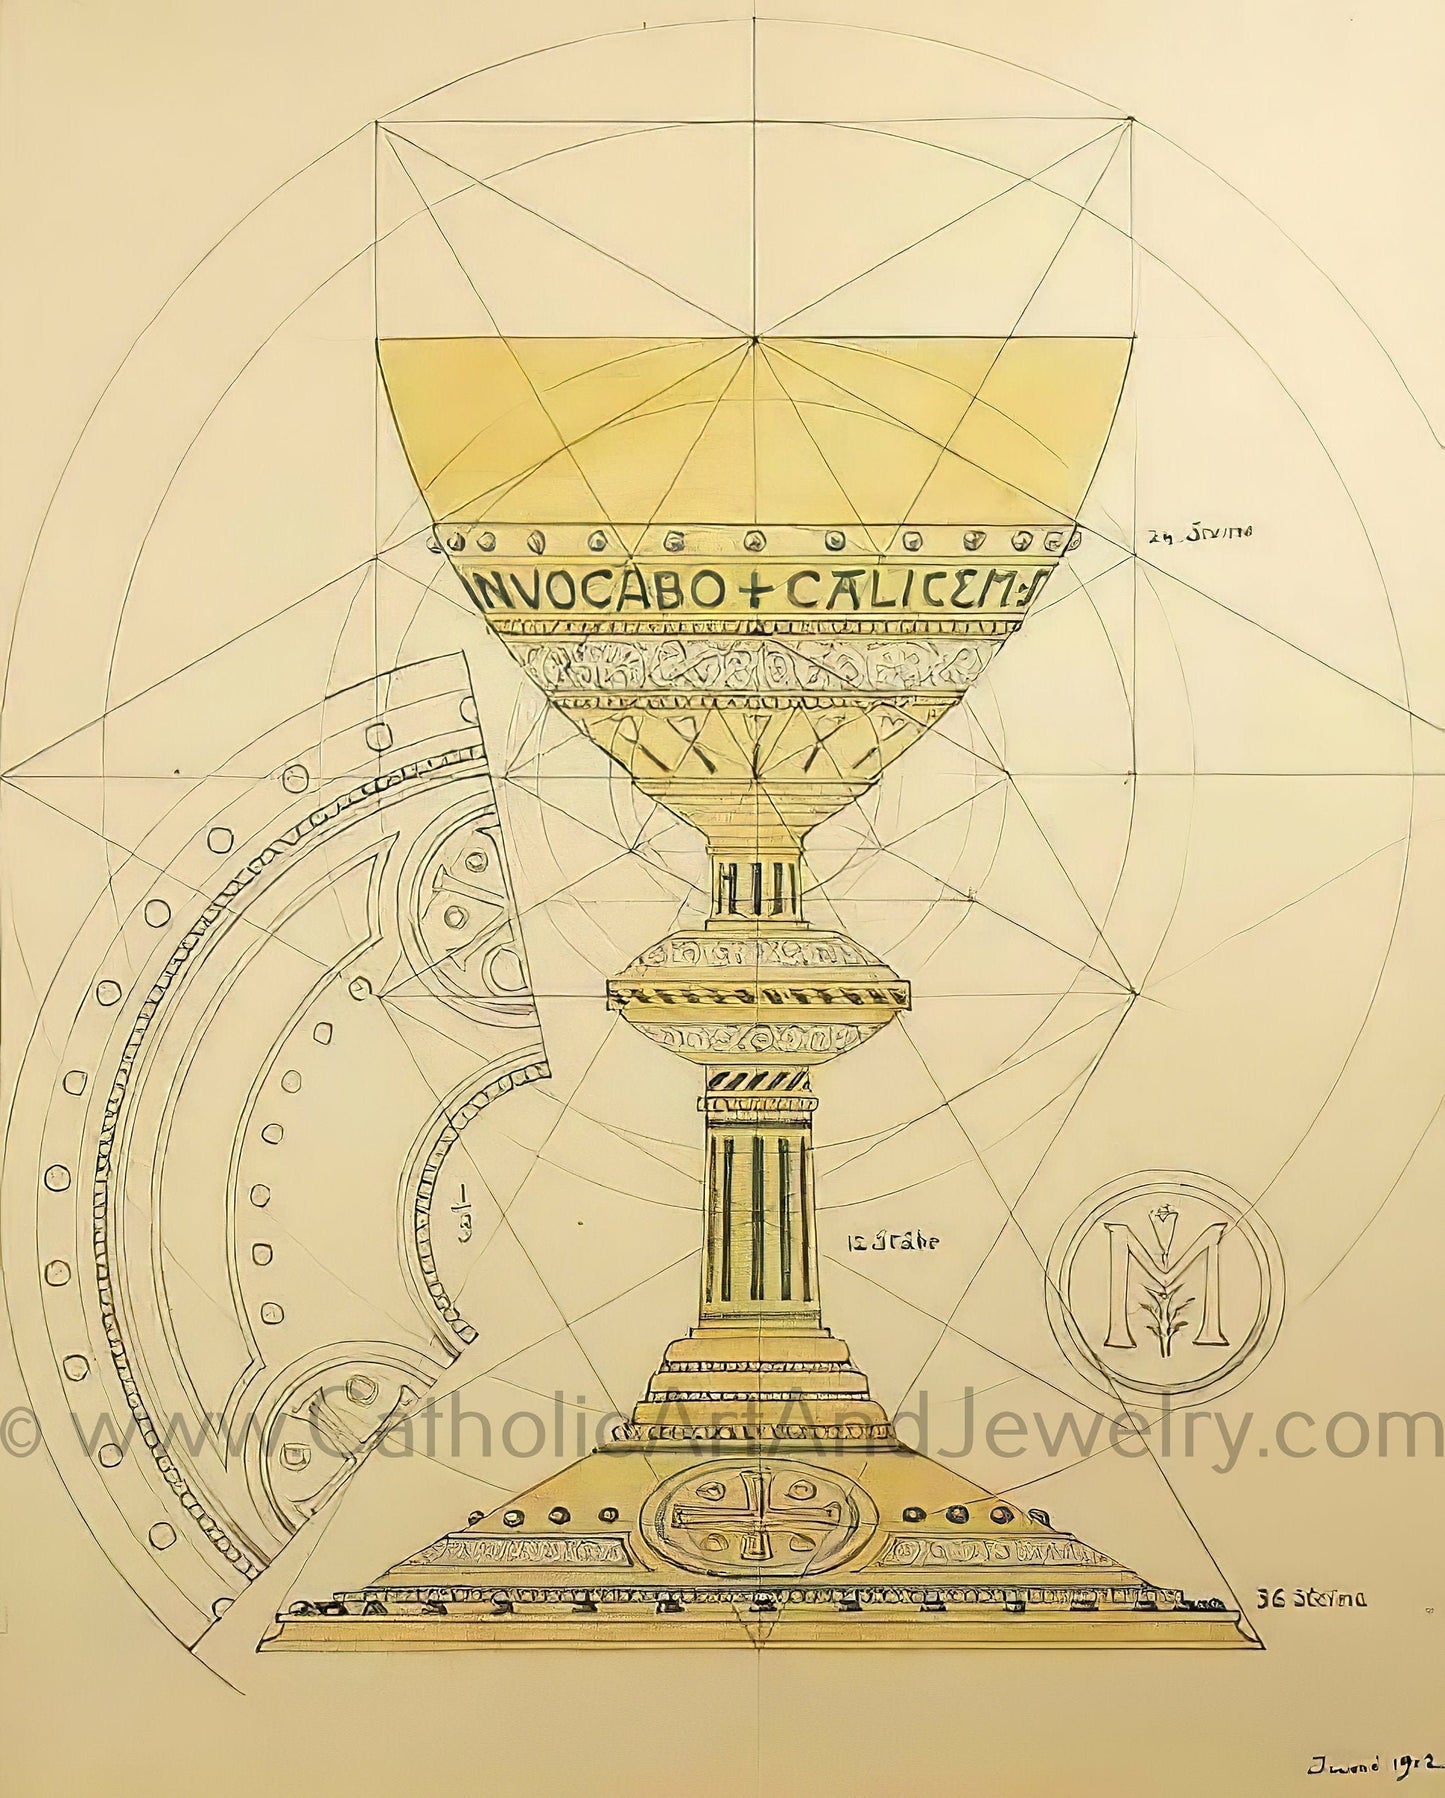 Eucharistic Chalice – from a Benedictine Abbey's design – Catholic Art Print – Catholic Gift – Gift for Priest – Archival Quality